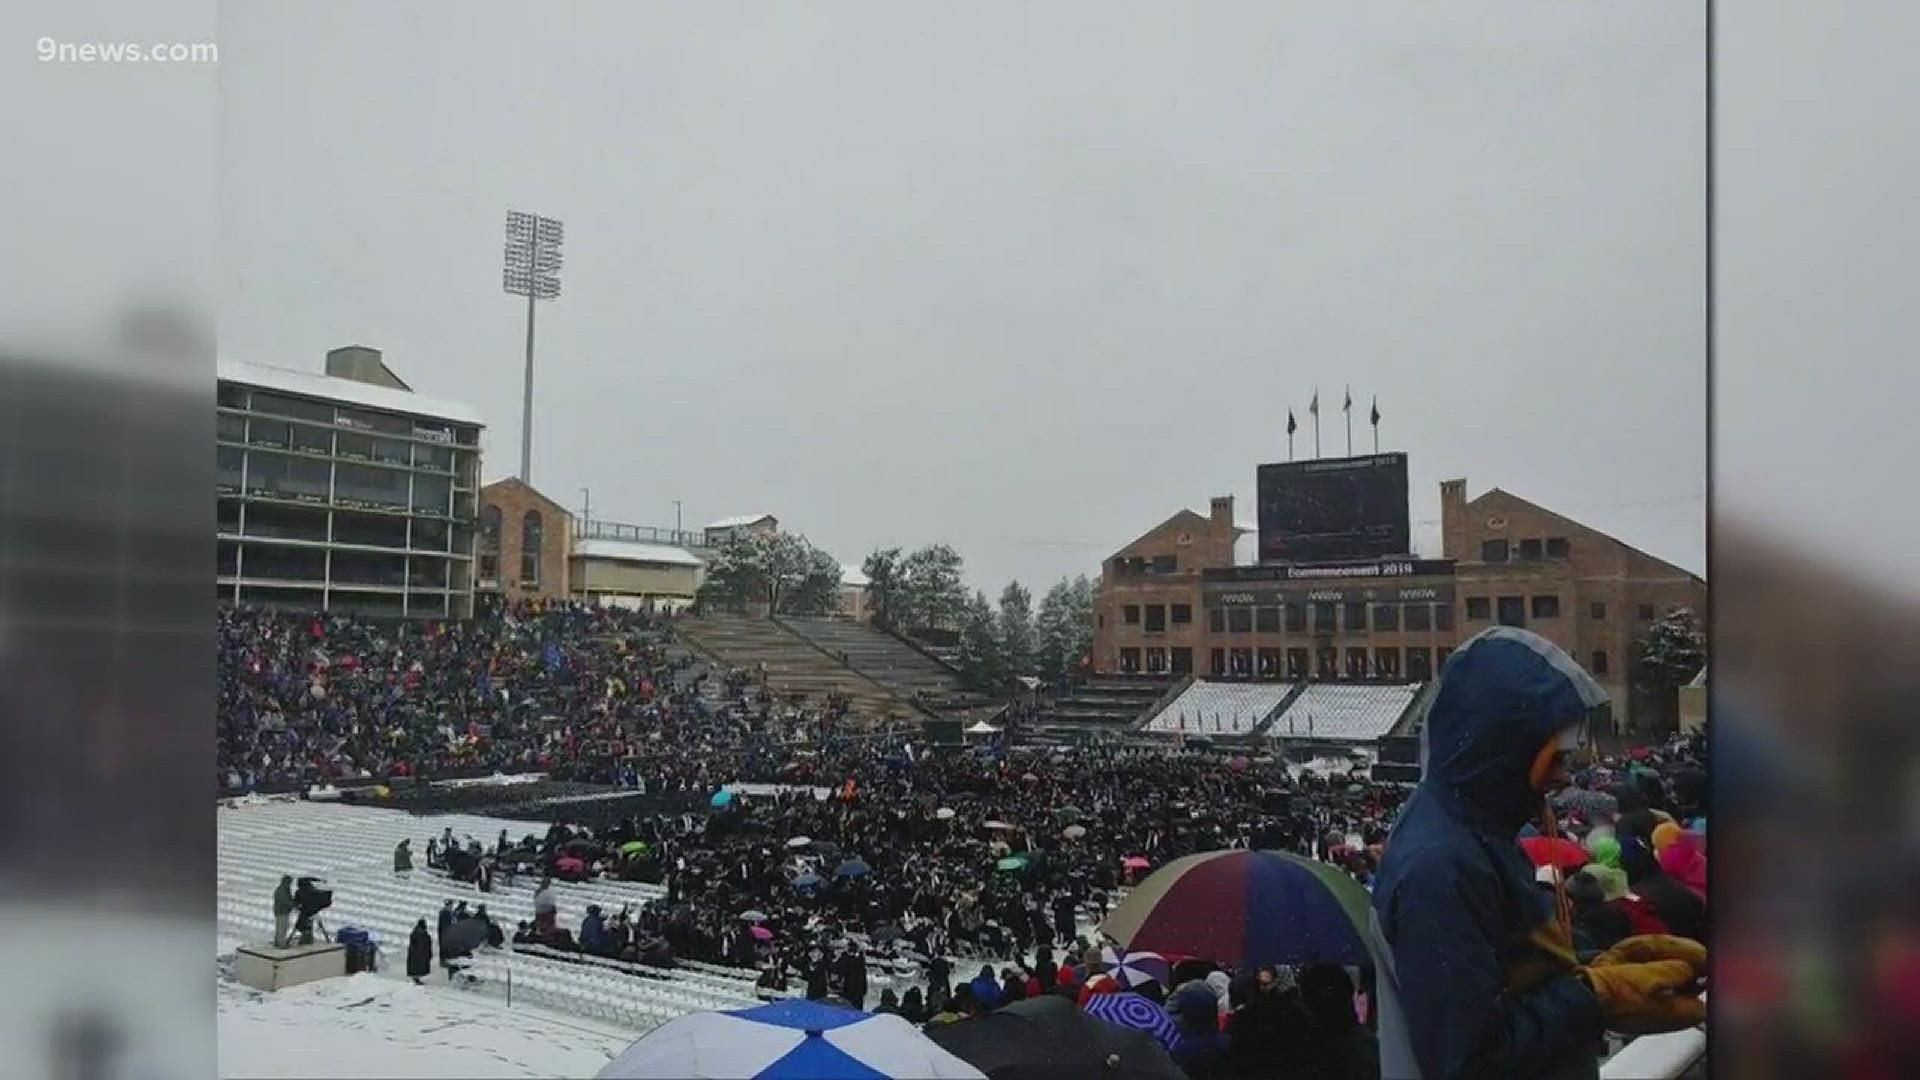 The spring commencement ceremony took place Thursday morning outdoors despite, snowy weather.